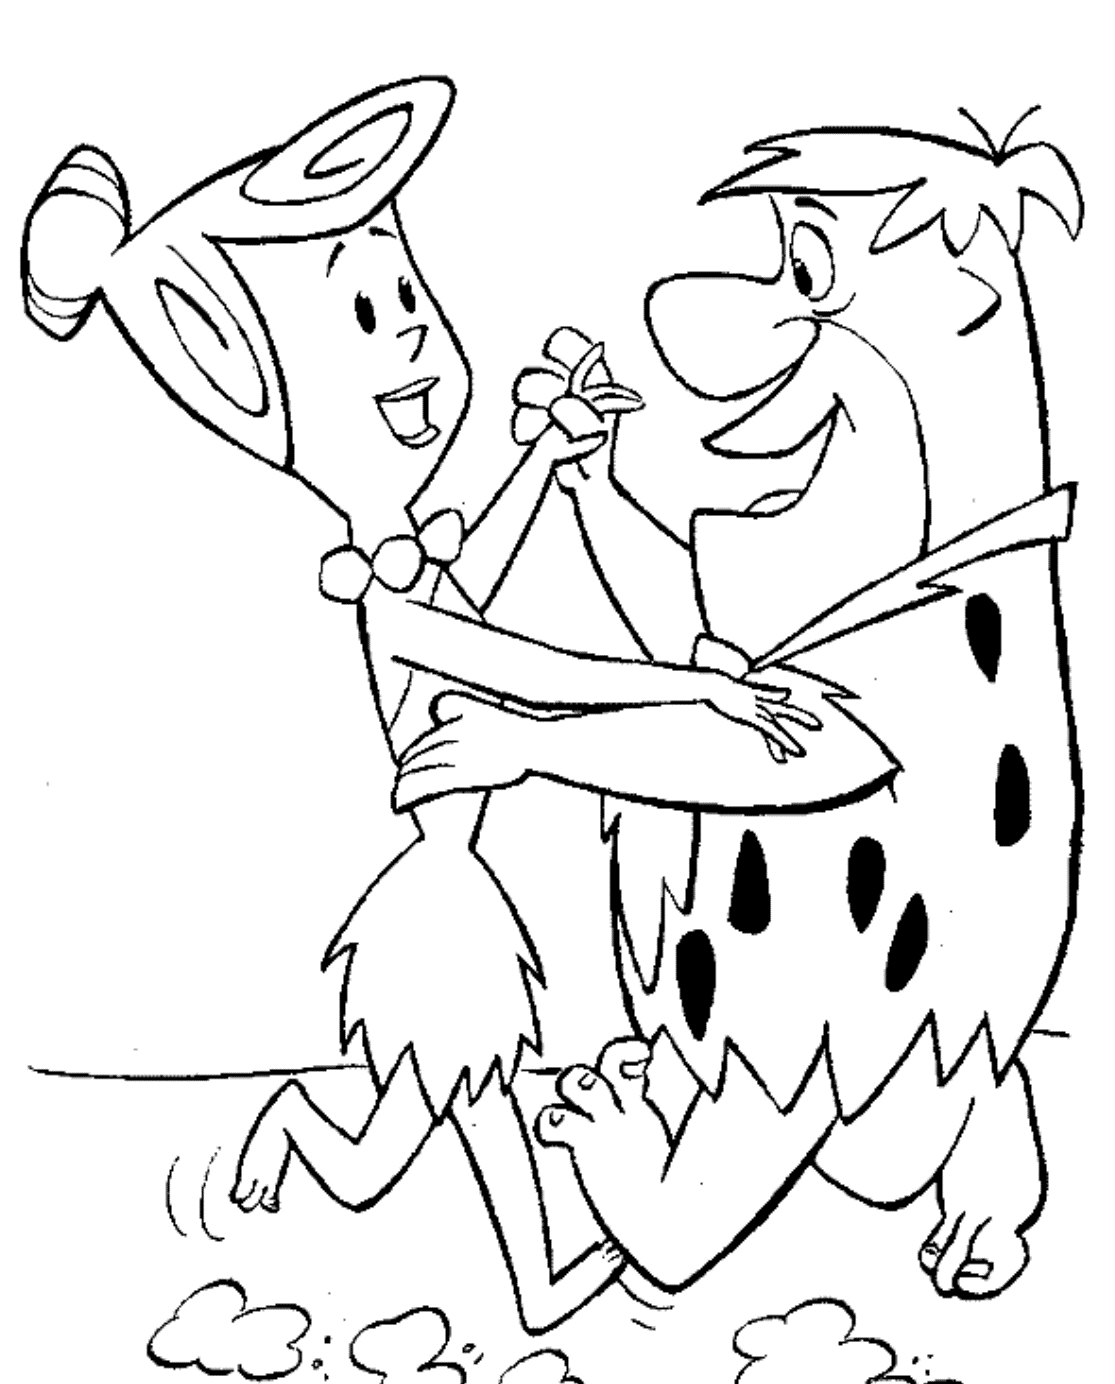 Cartoon Coloring Pages The Flintstones | Cartoon Coloring pages of ...